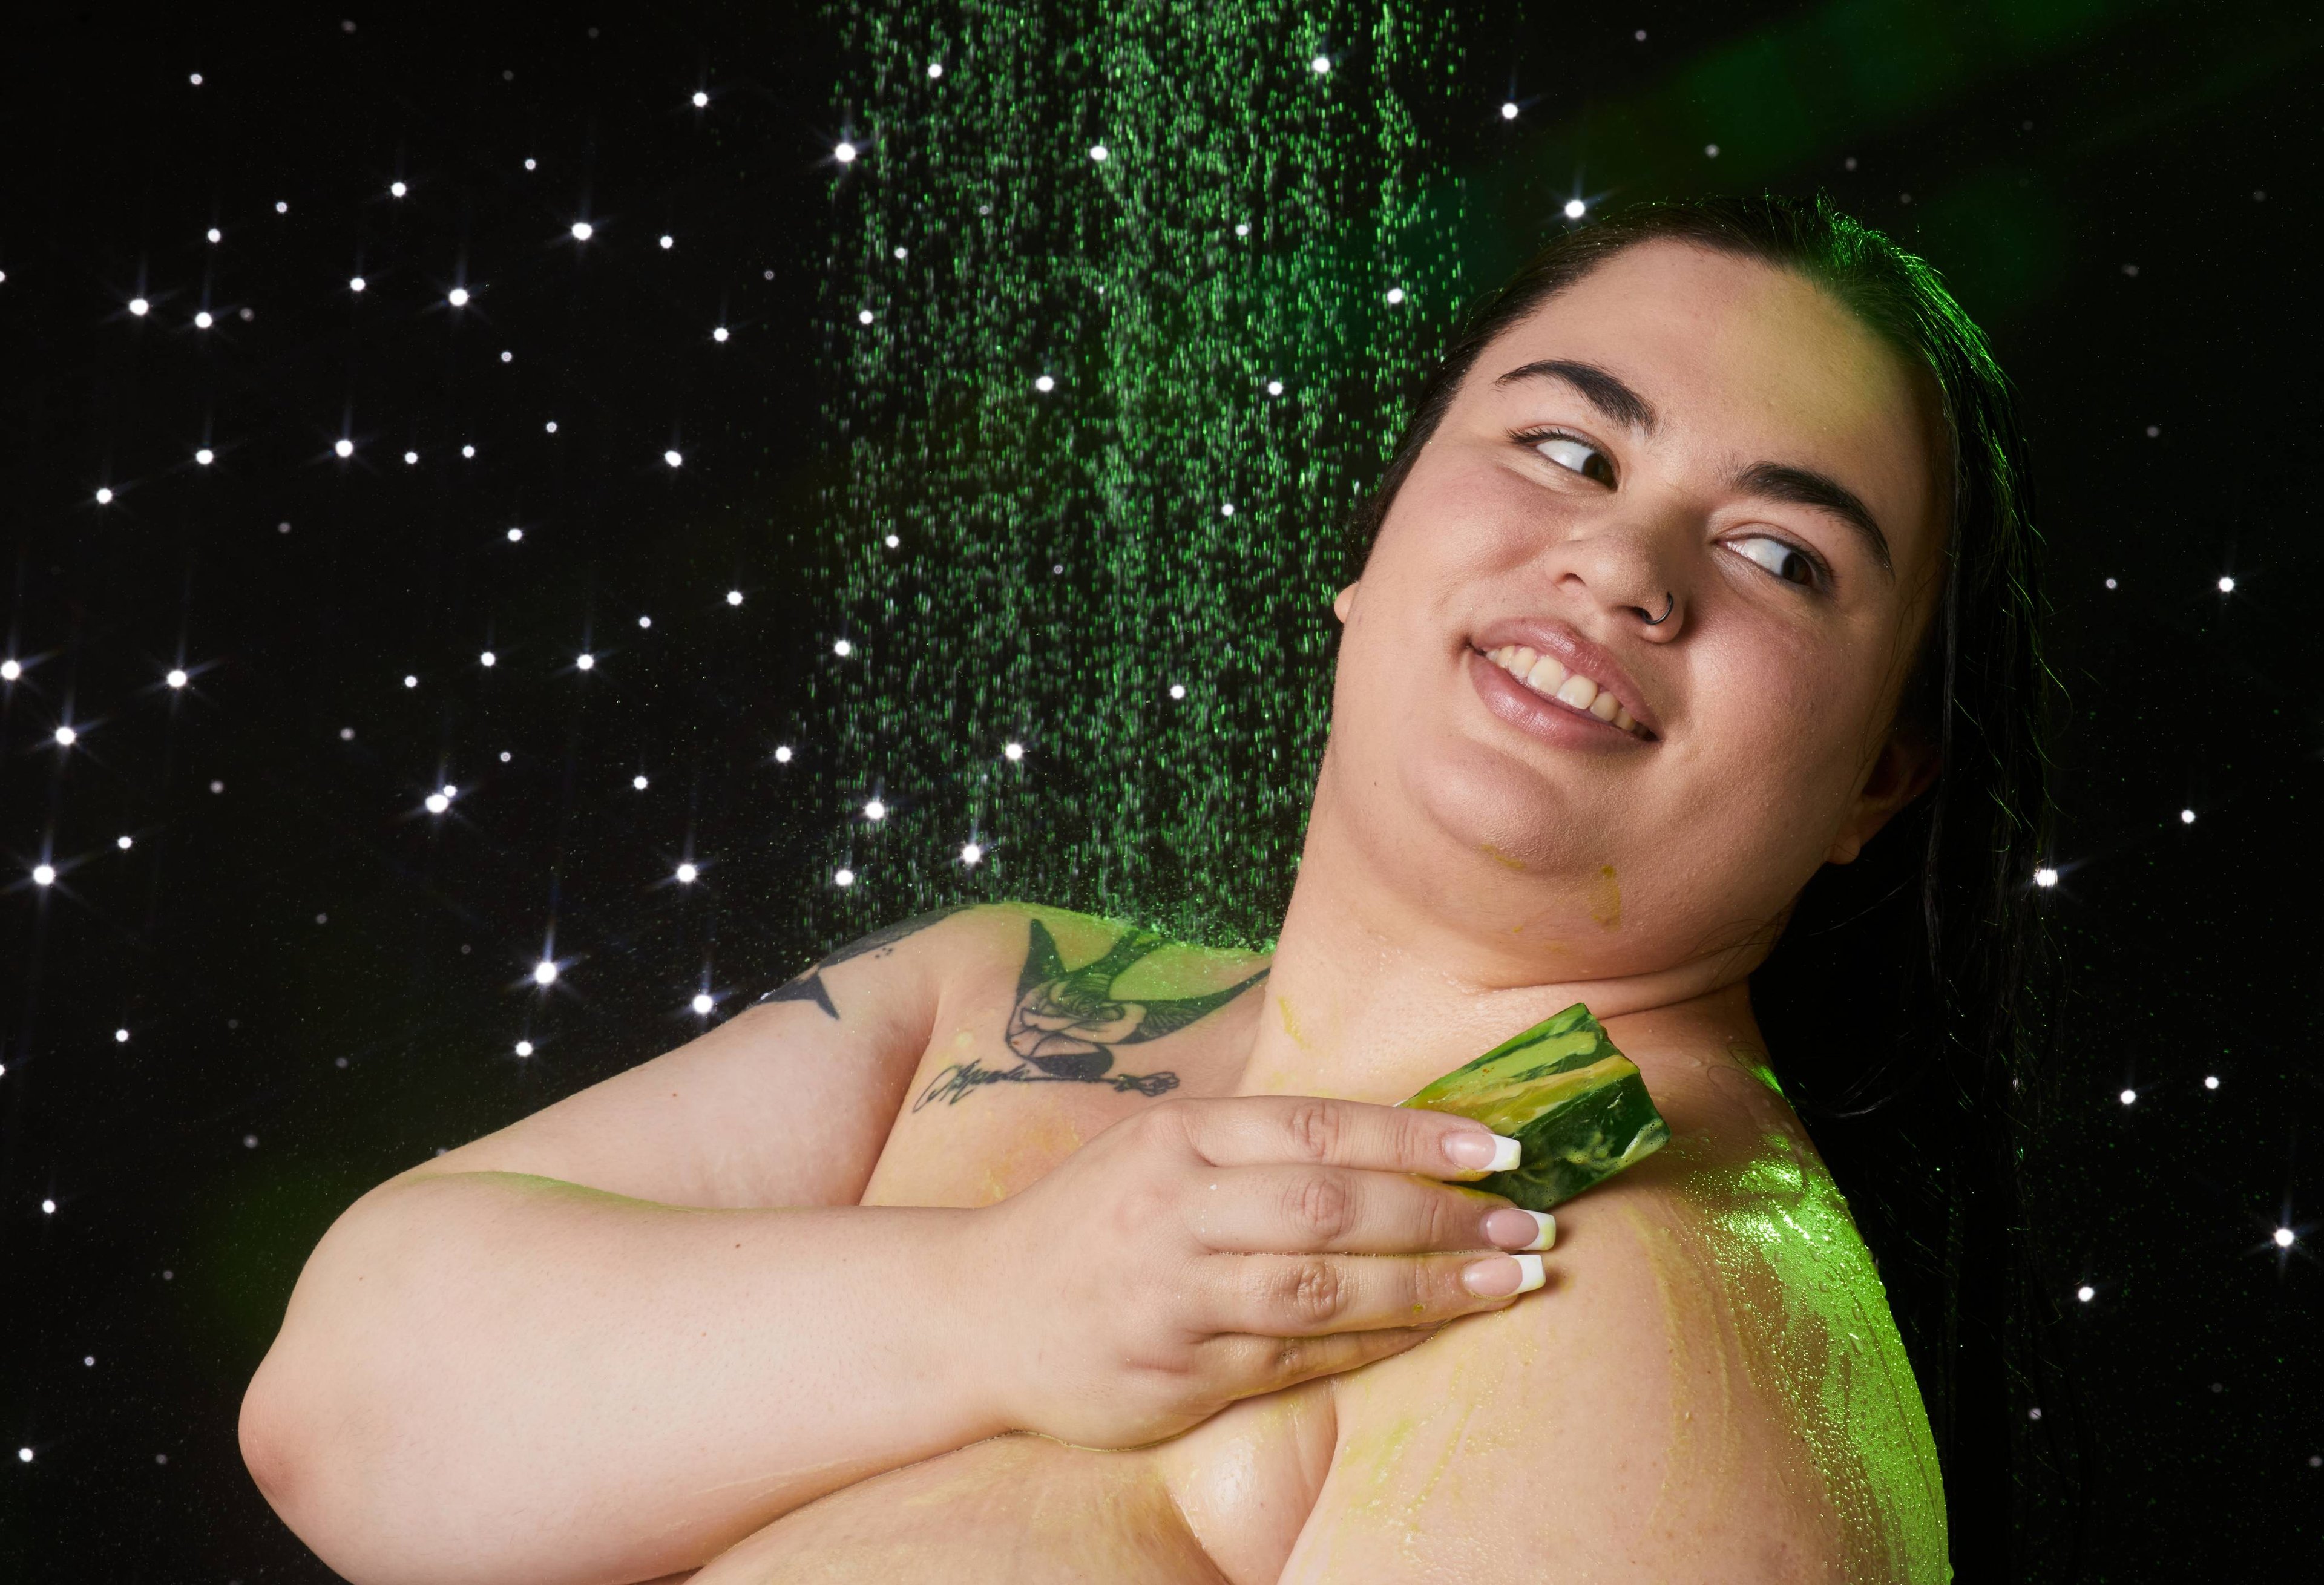 Model is stood under running shower water soothing the Lord of Misrule soap over their shoulder on a twinkling background.